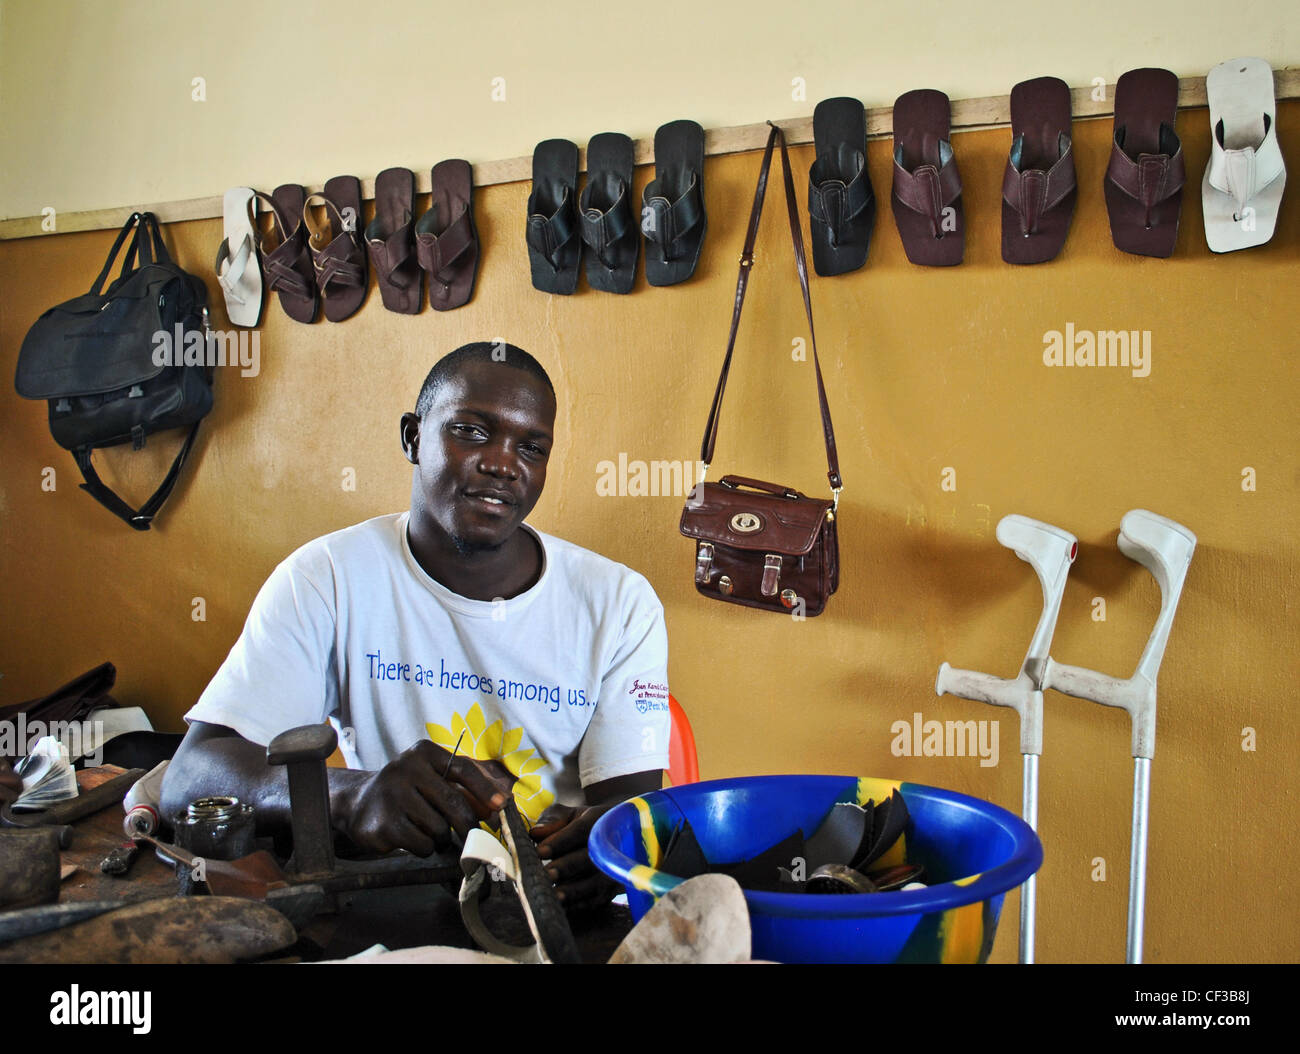 A man with polio makes sandals in a UNDP-funded employment project in Makeni, Sierra Leone Stock Photo